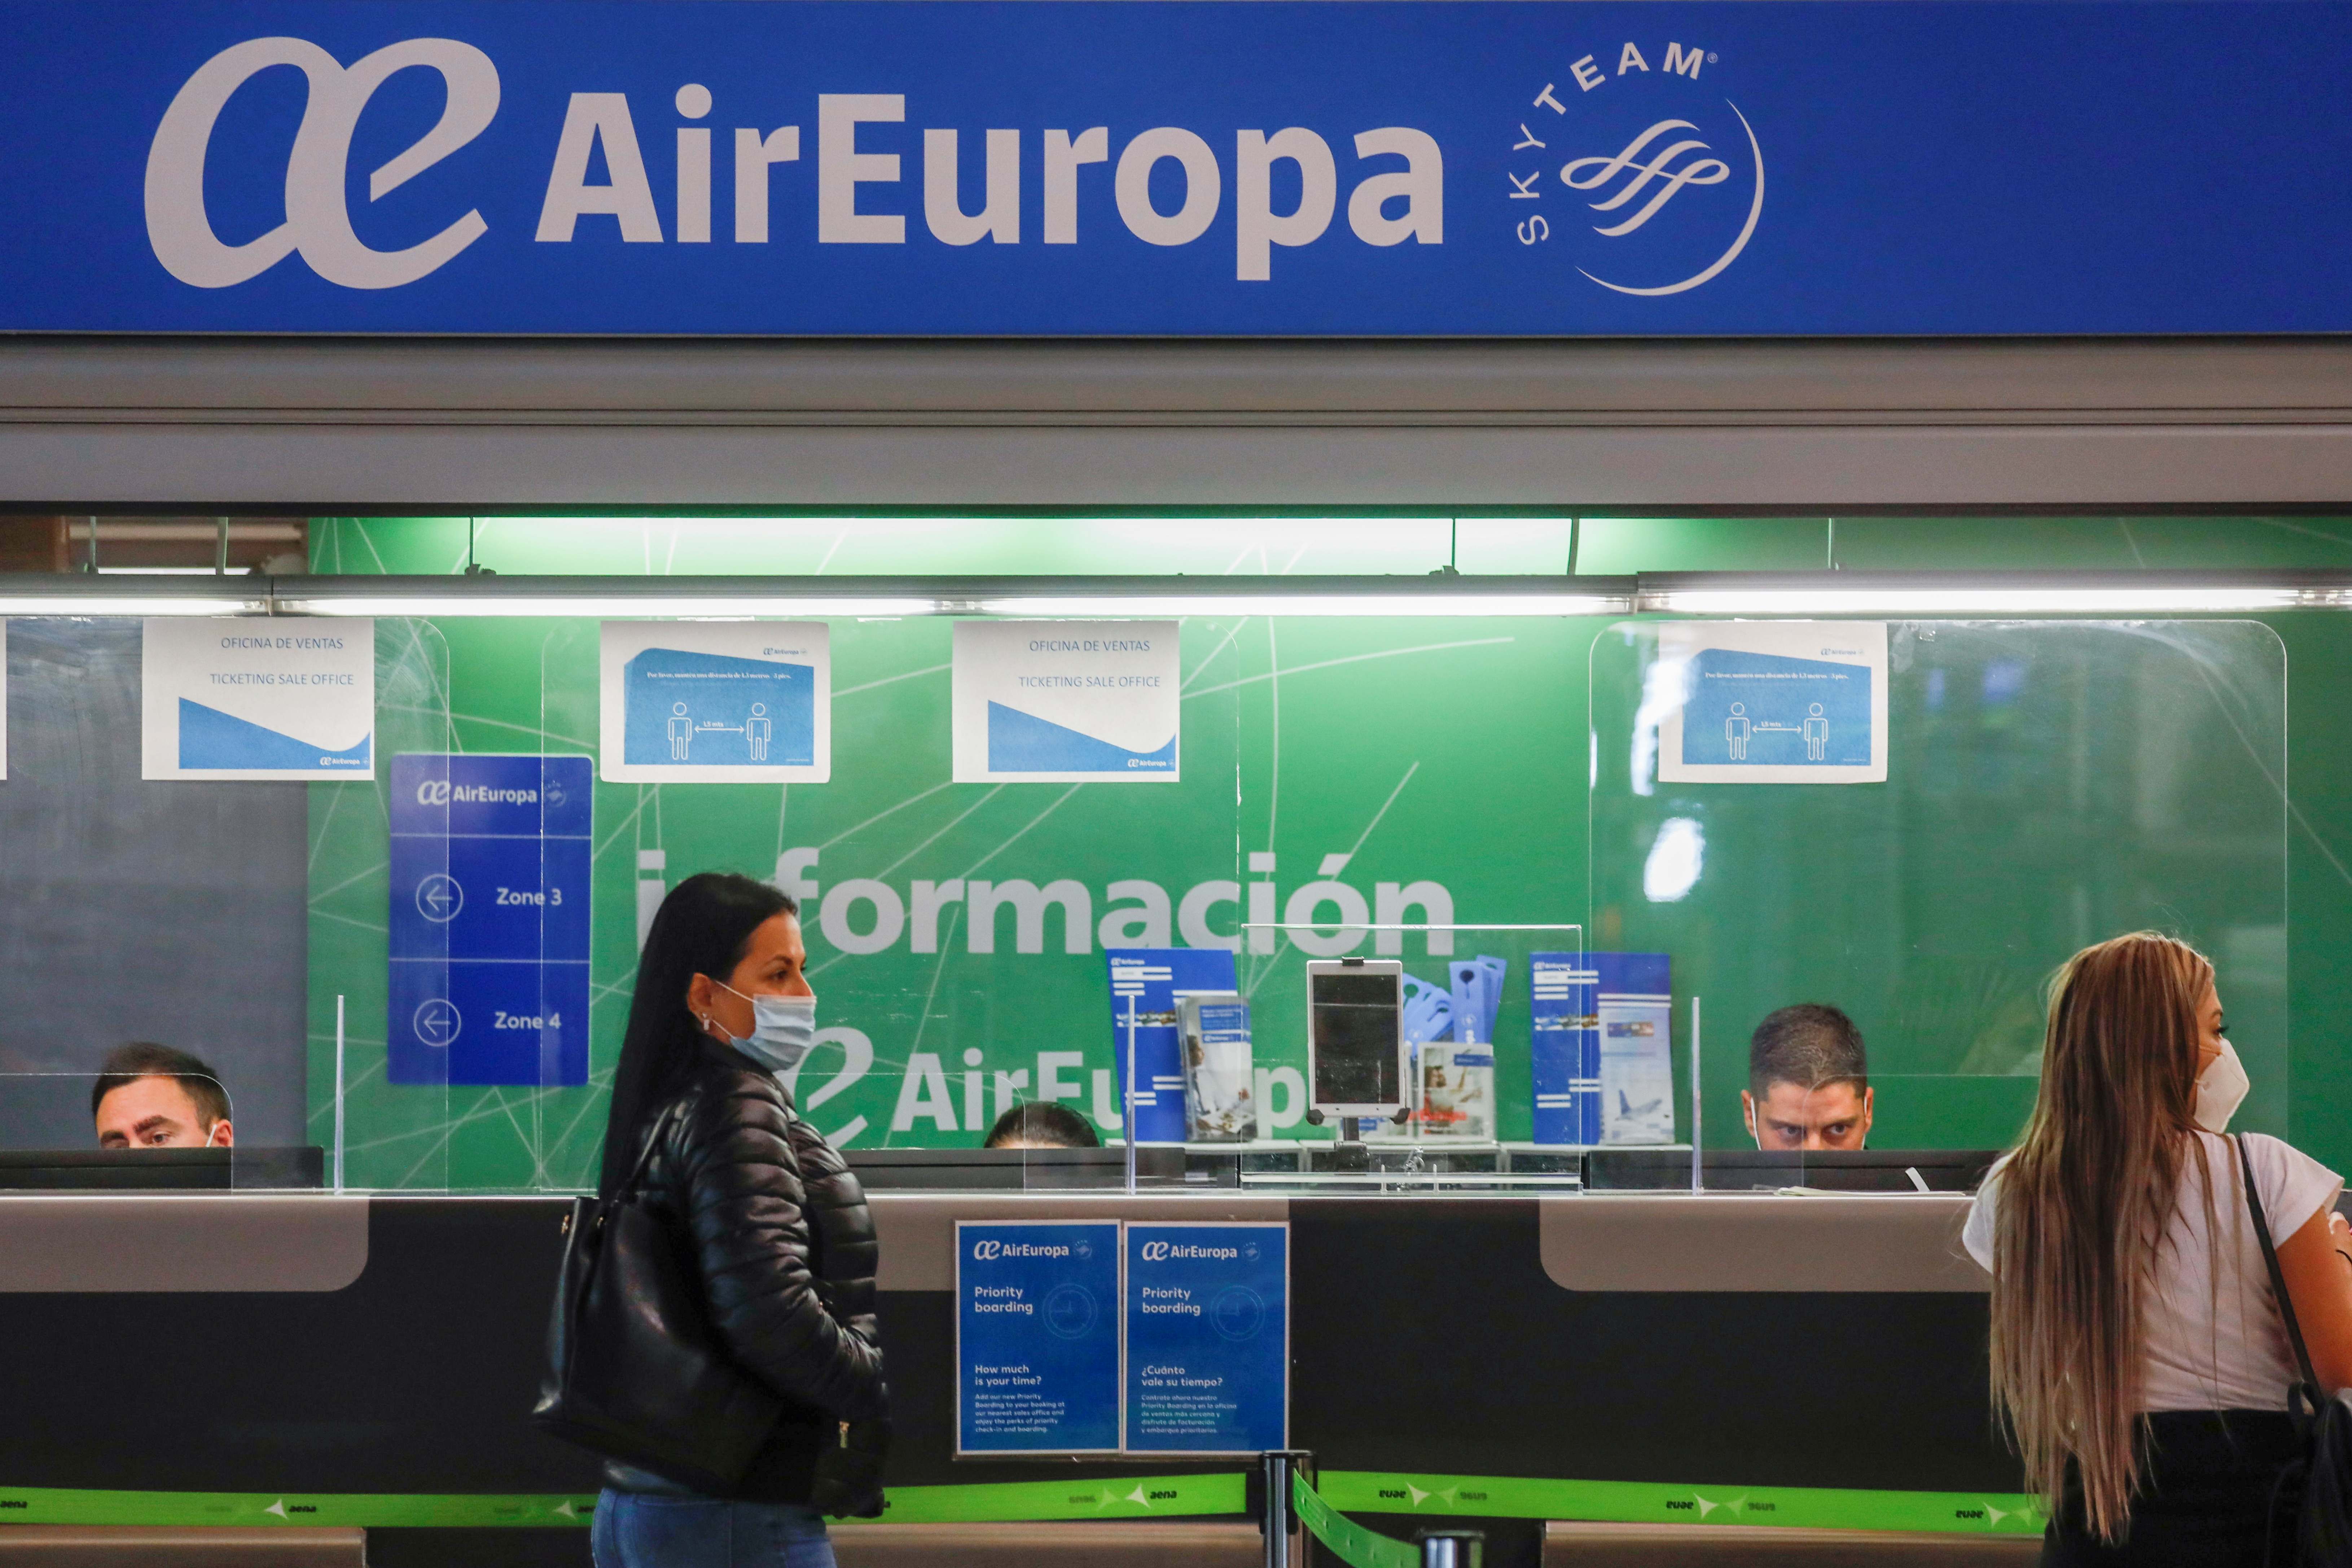 Passengers wearing facemasks stand at an Air Europa customer service booth at Adolfo Suarez Barajas airport amid the coronavirus disease (COVID-19) pandemic in Madrid